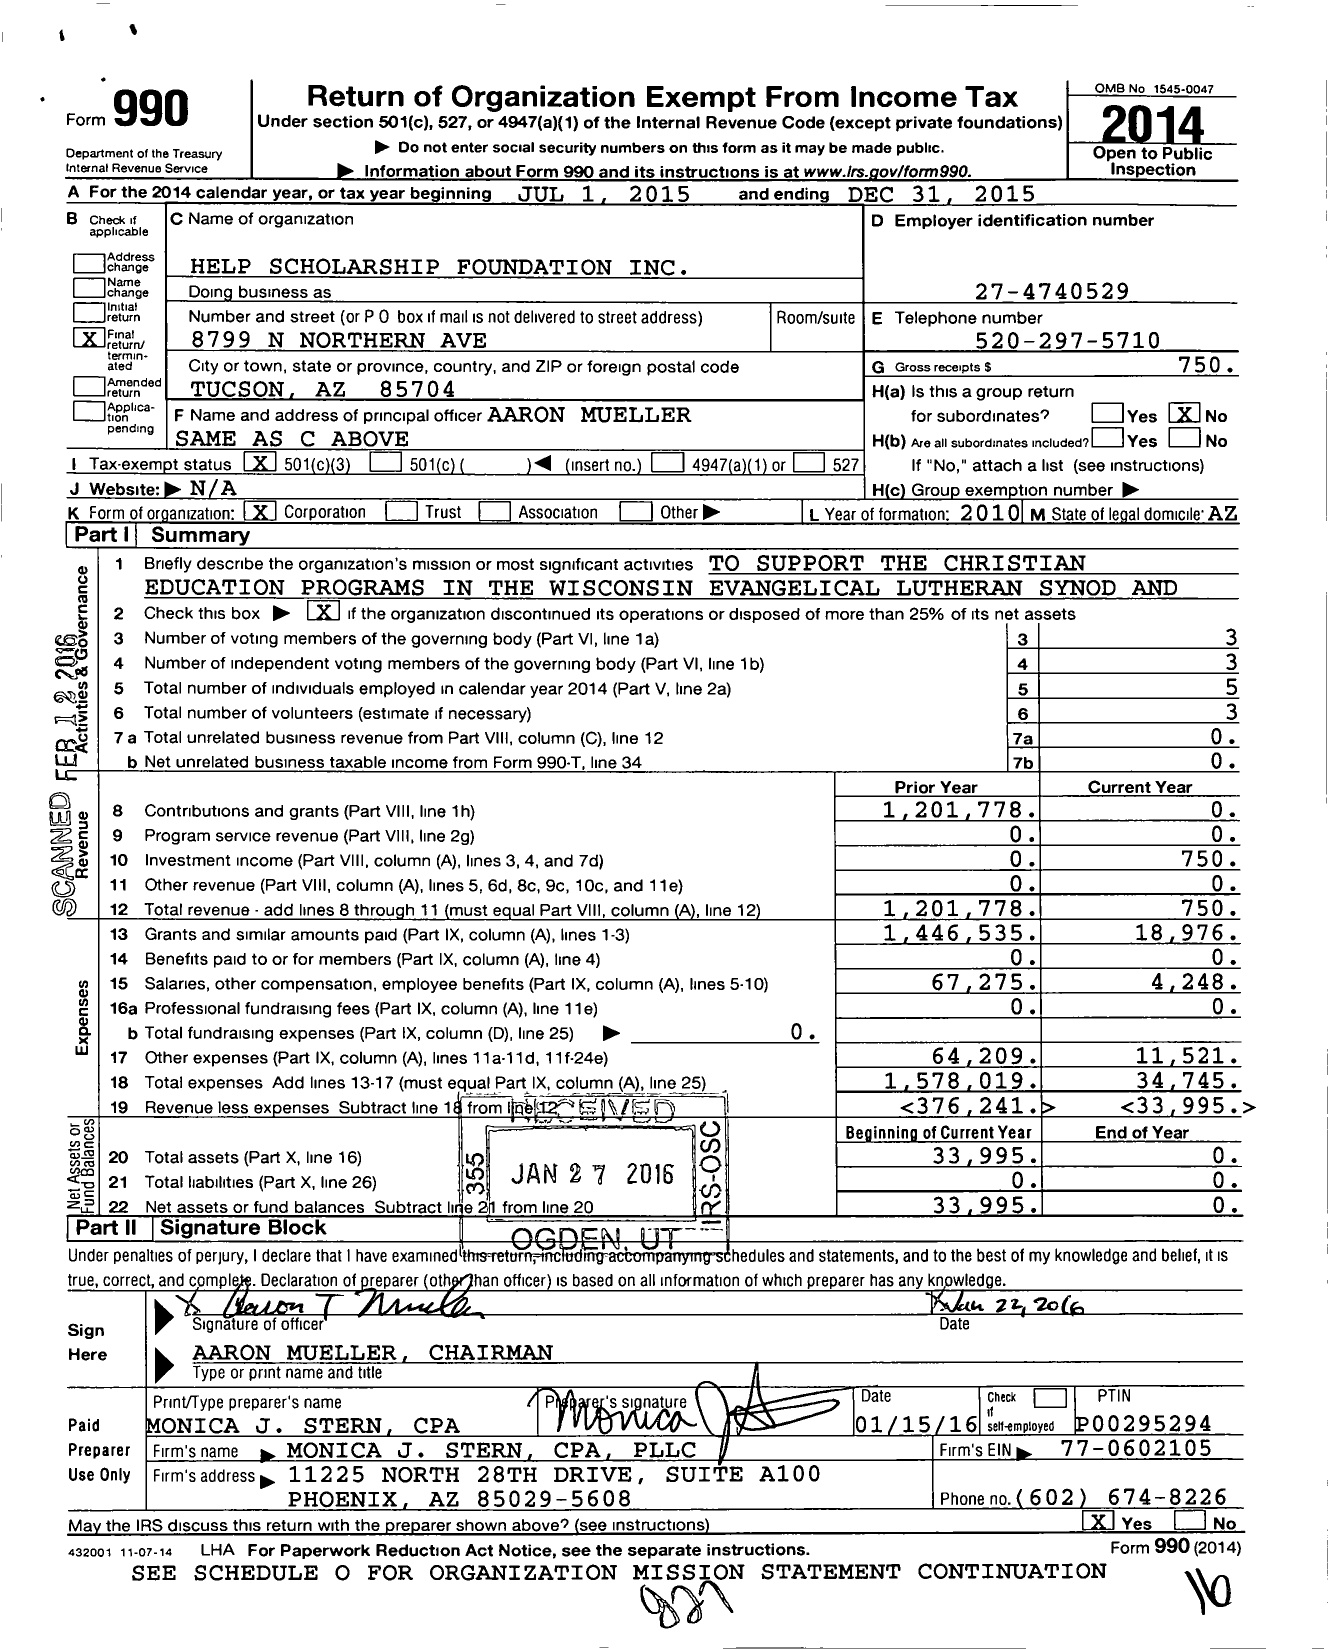 Image of first page of 2015 Form 990 for Help Scholarship Foundation